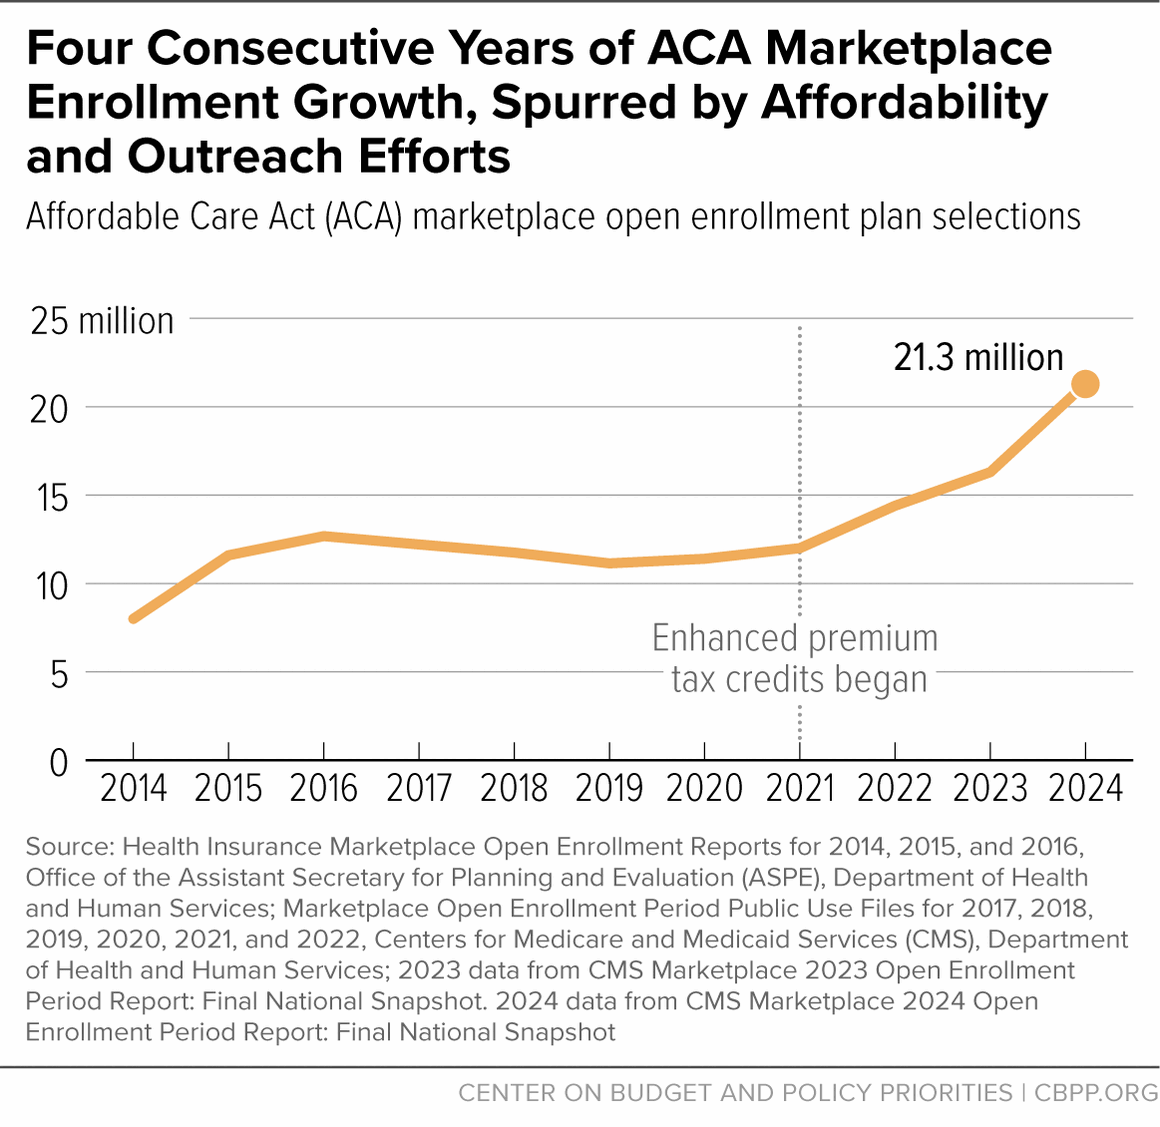 Line chart of ACA Marketplace enrollment growth from 2014 to 2024